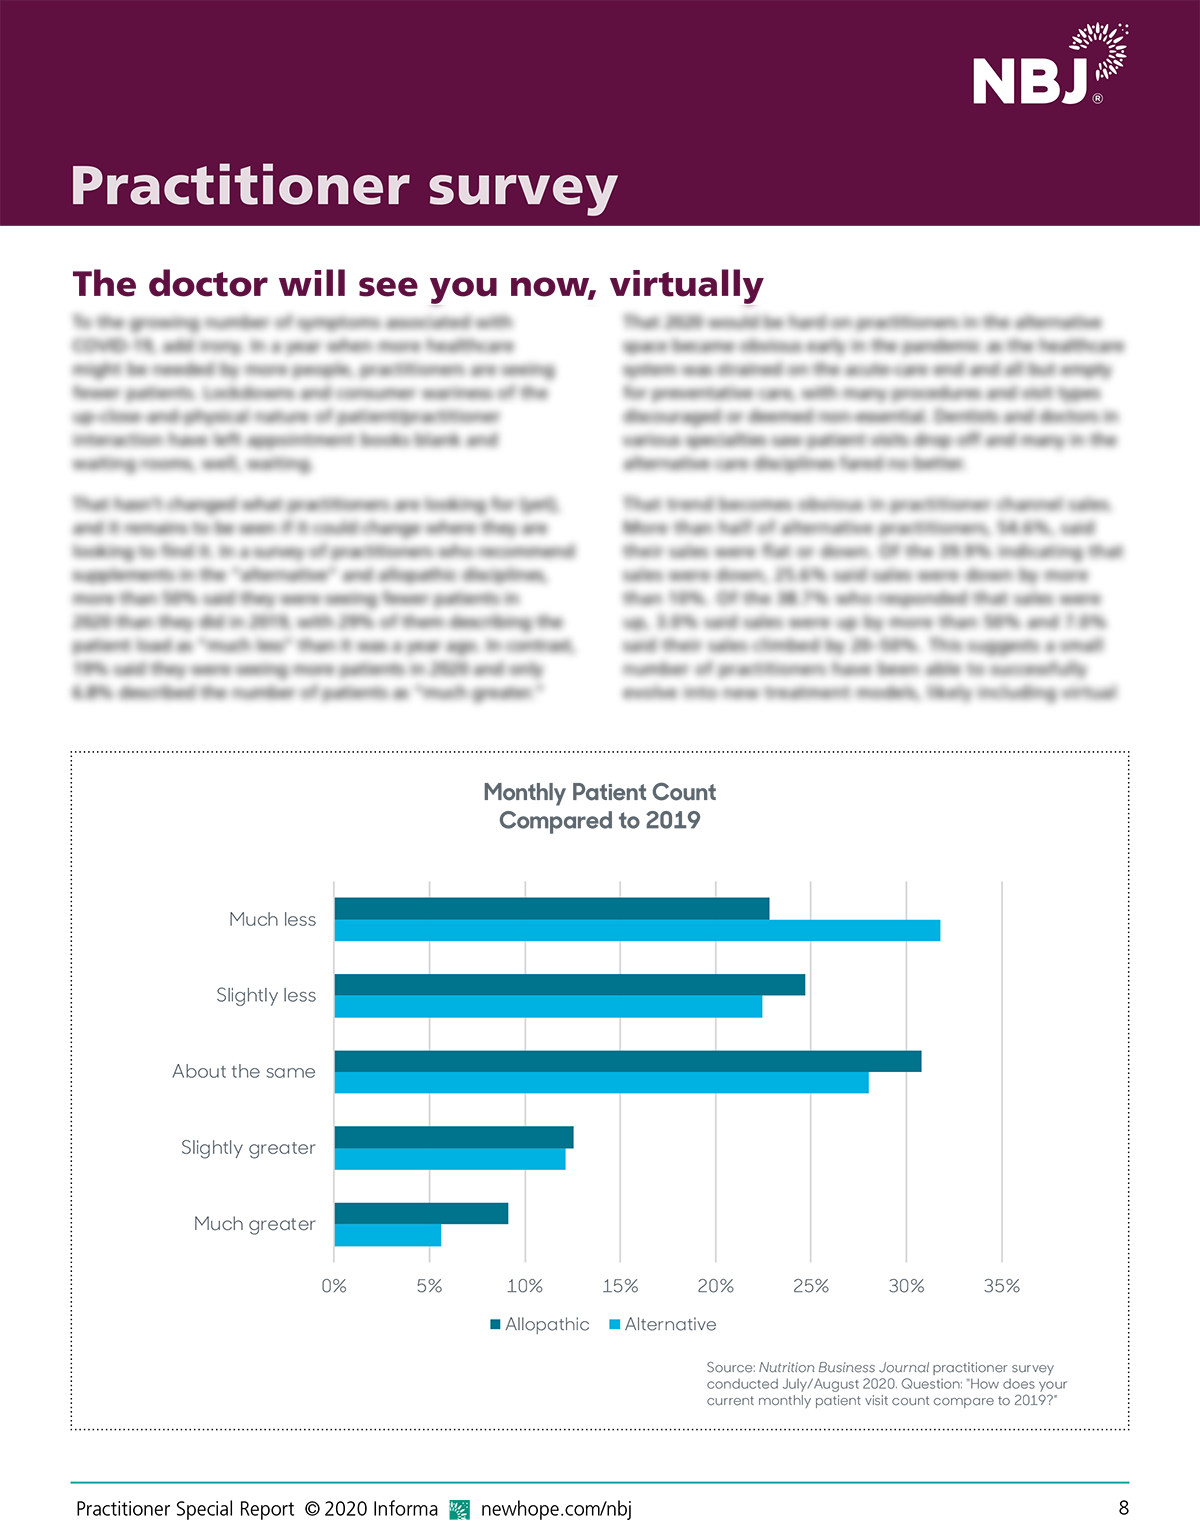 Practitioner Special Report